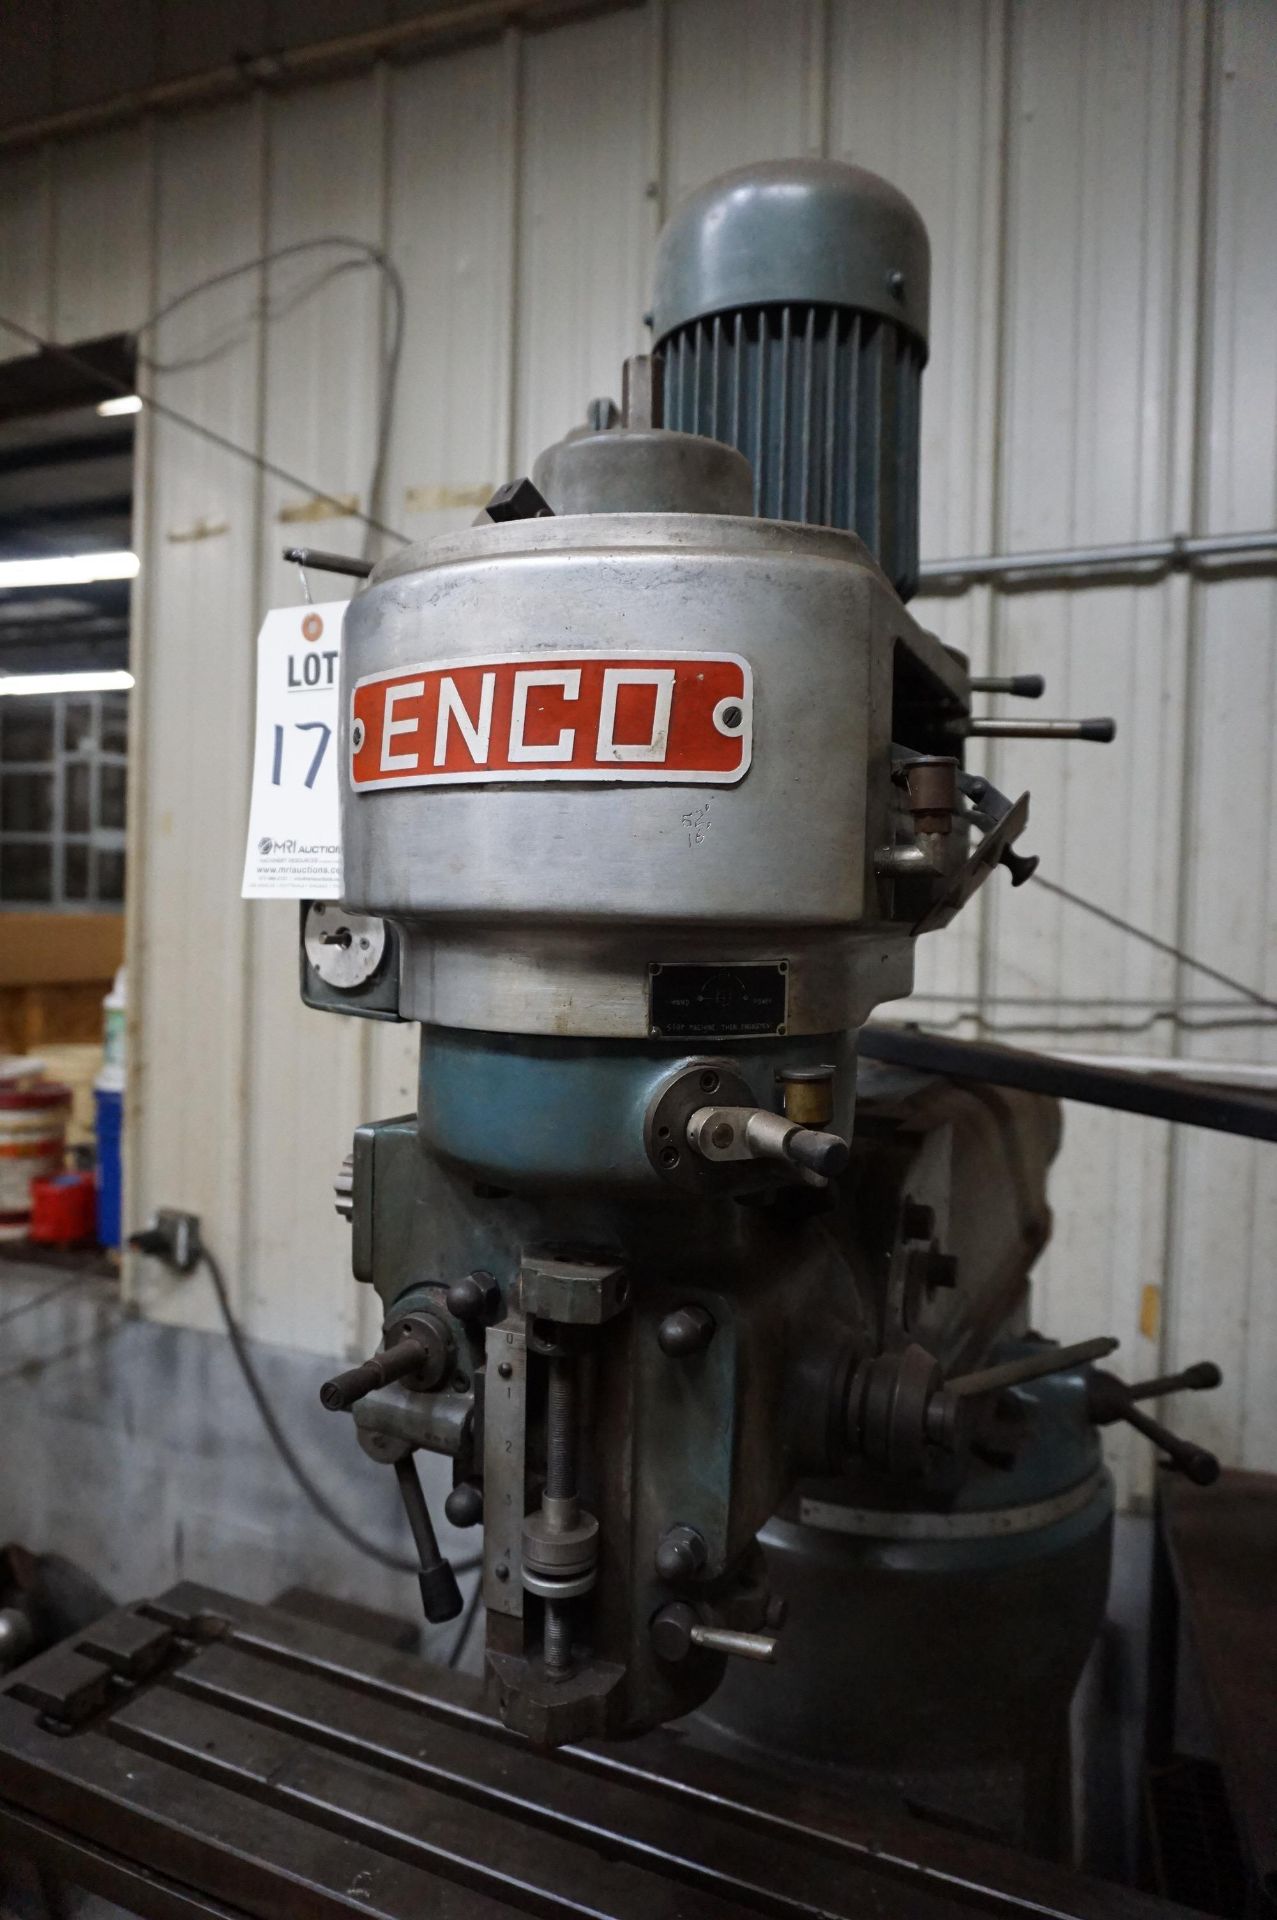 ENCO MANUAL KNEE MILL WITH ENCO DIGITAL READOUT AND MILL TABLE POWER FEED - Image 5 of 5